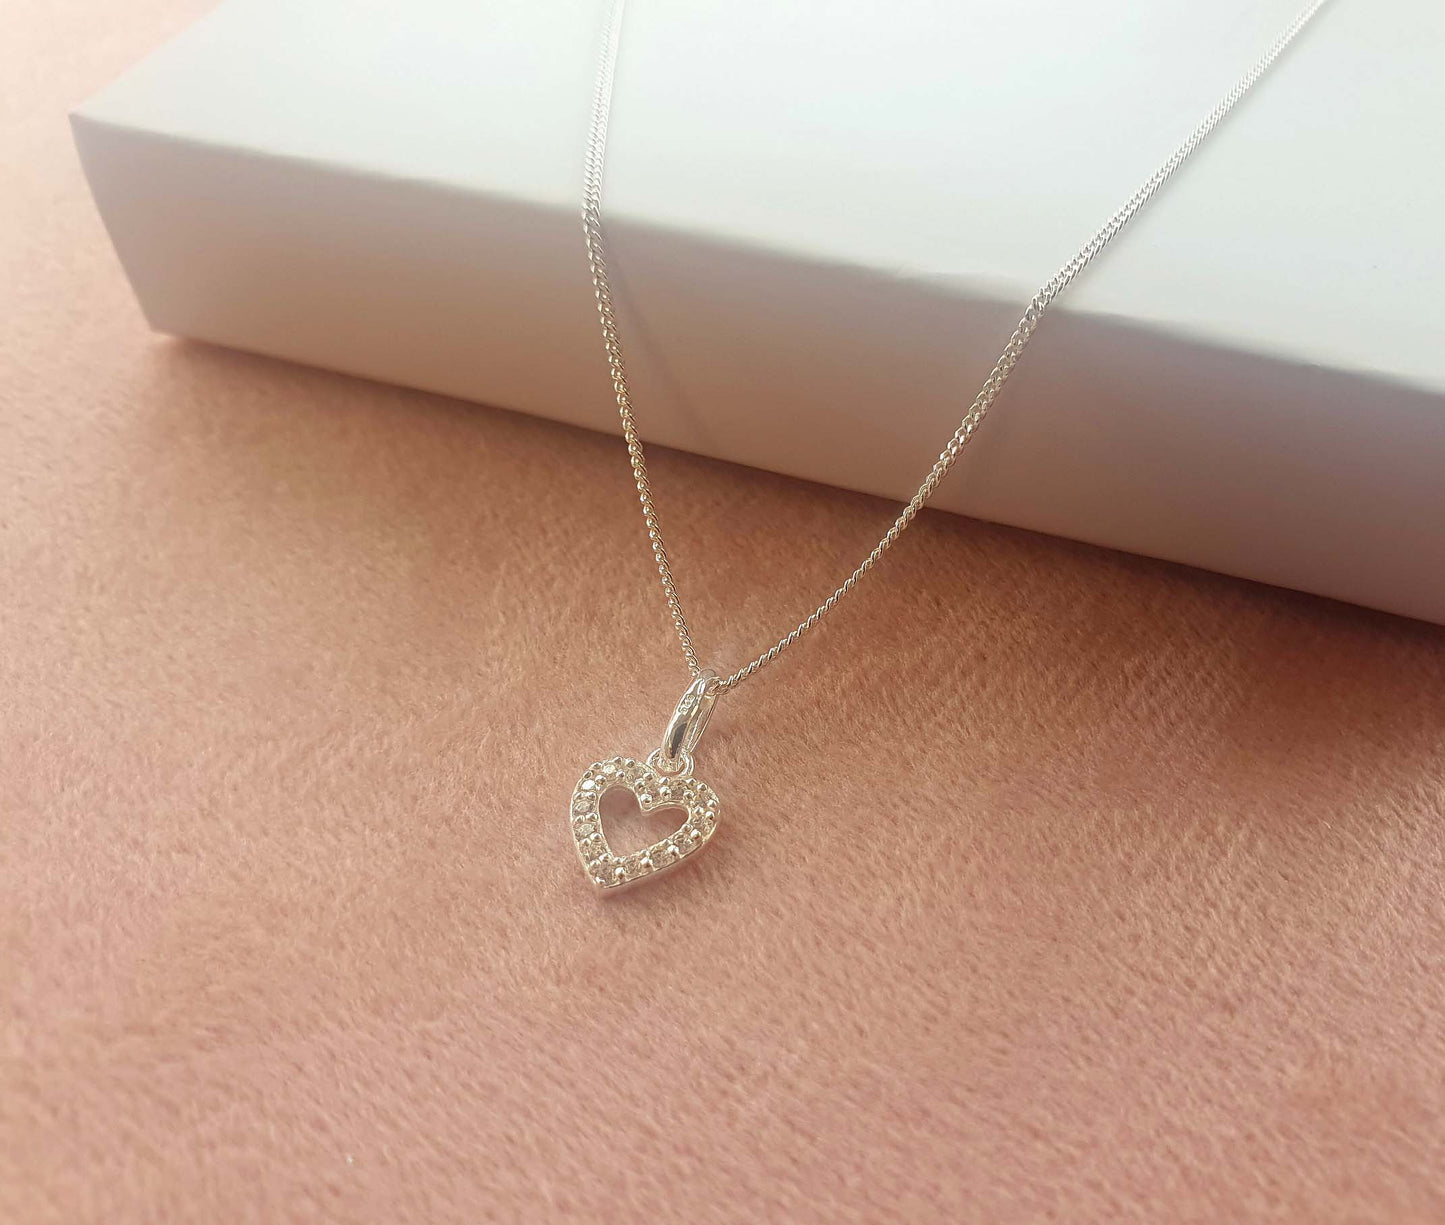 Nana of the Bride Heart Necklace with Cubic Zirconia in Sterling Silver 925, Personalised Gift